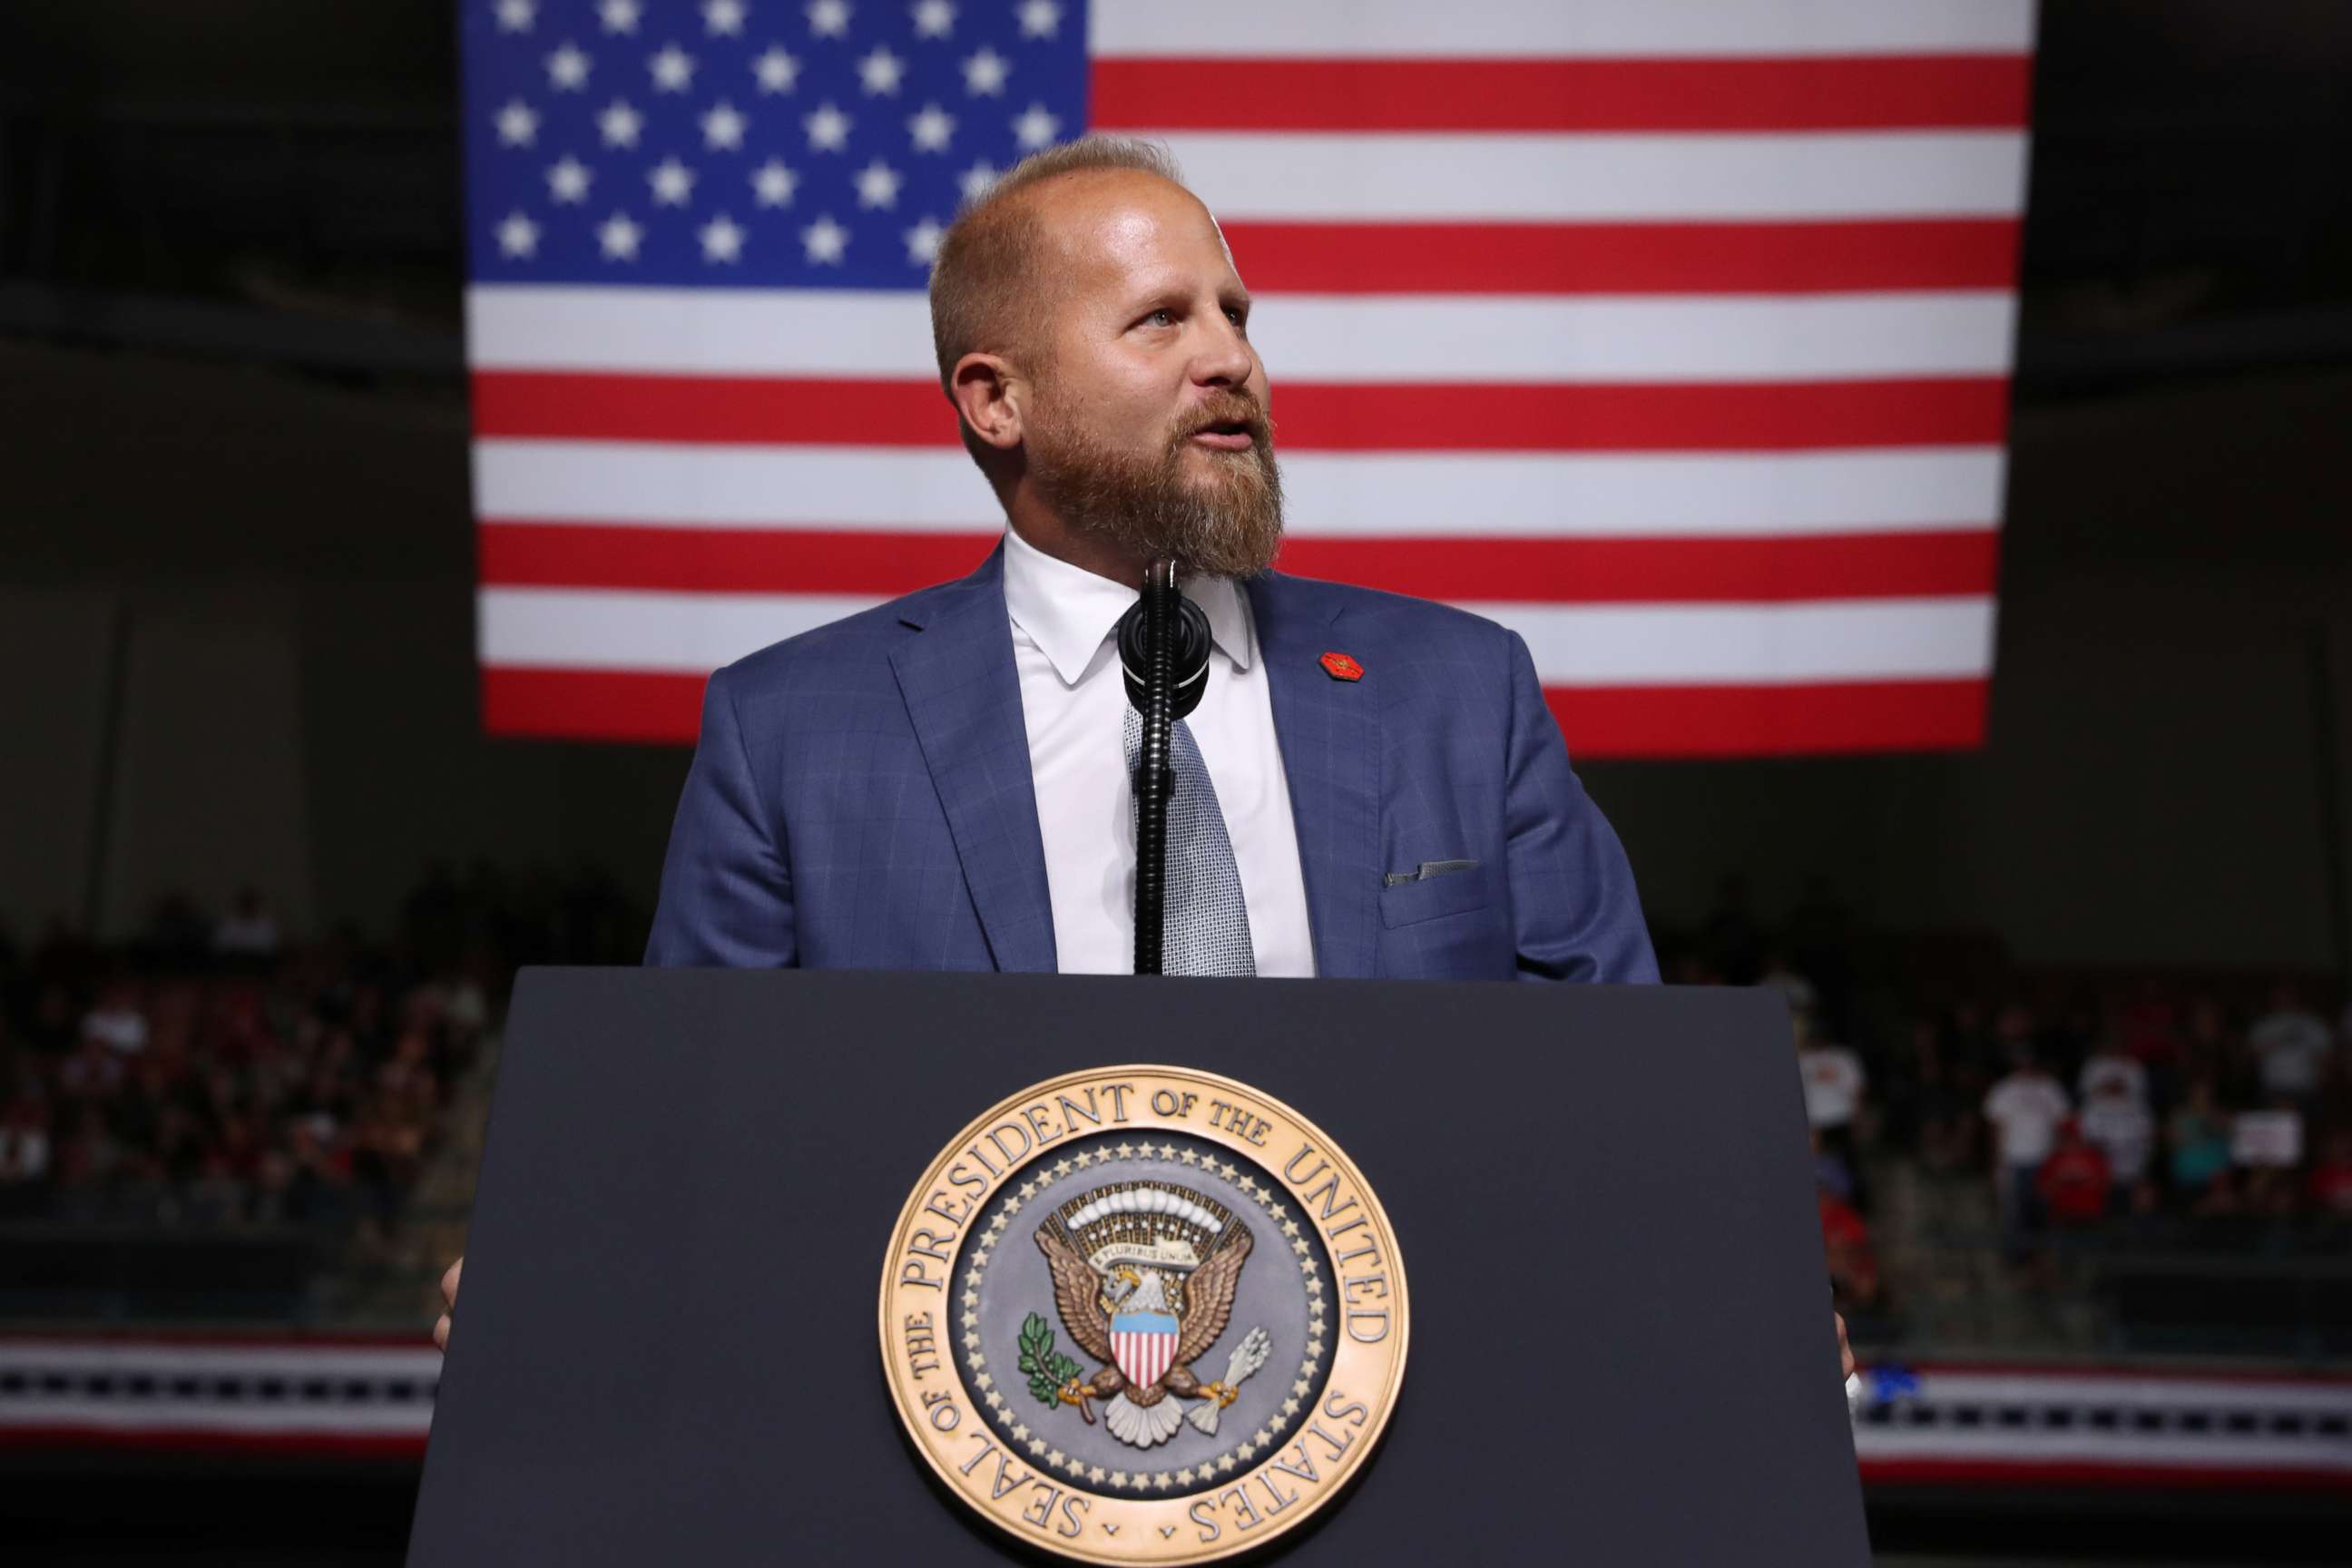 PHOTO: Trump 2020 campaign manager Brad Parscale addresses the crowd before U.S. President Donald Trump rallies with supporters in Manchester, N.H., Aug. 15, 2019.